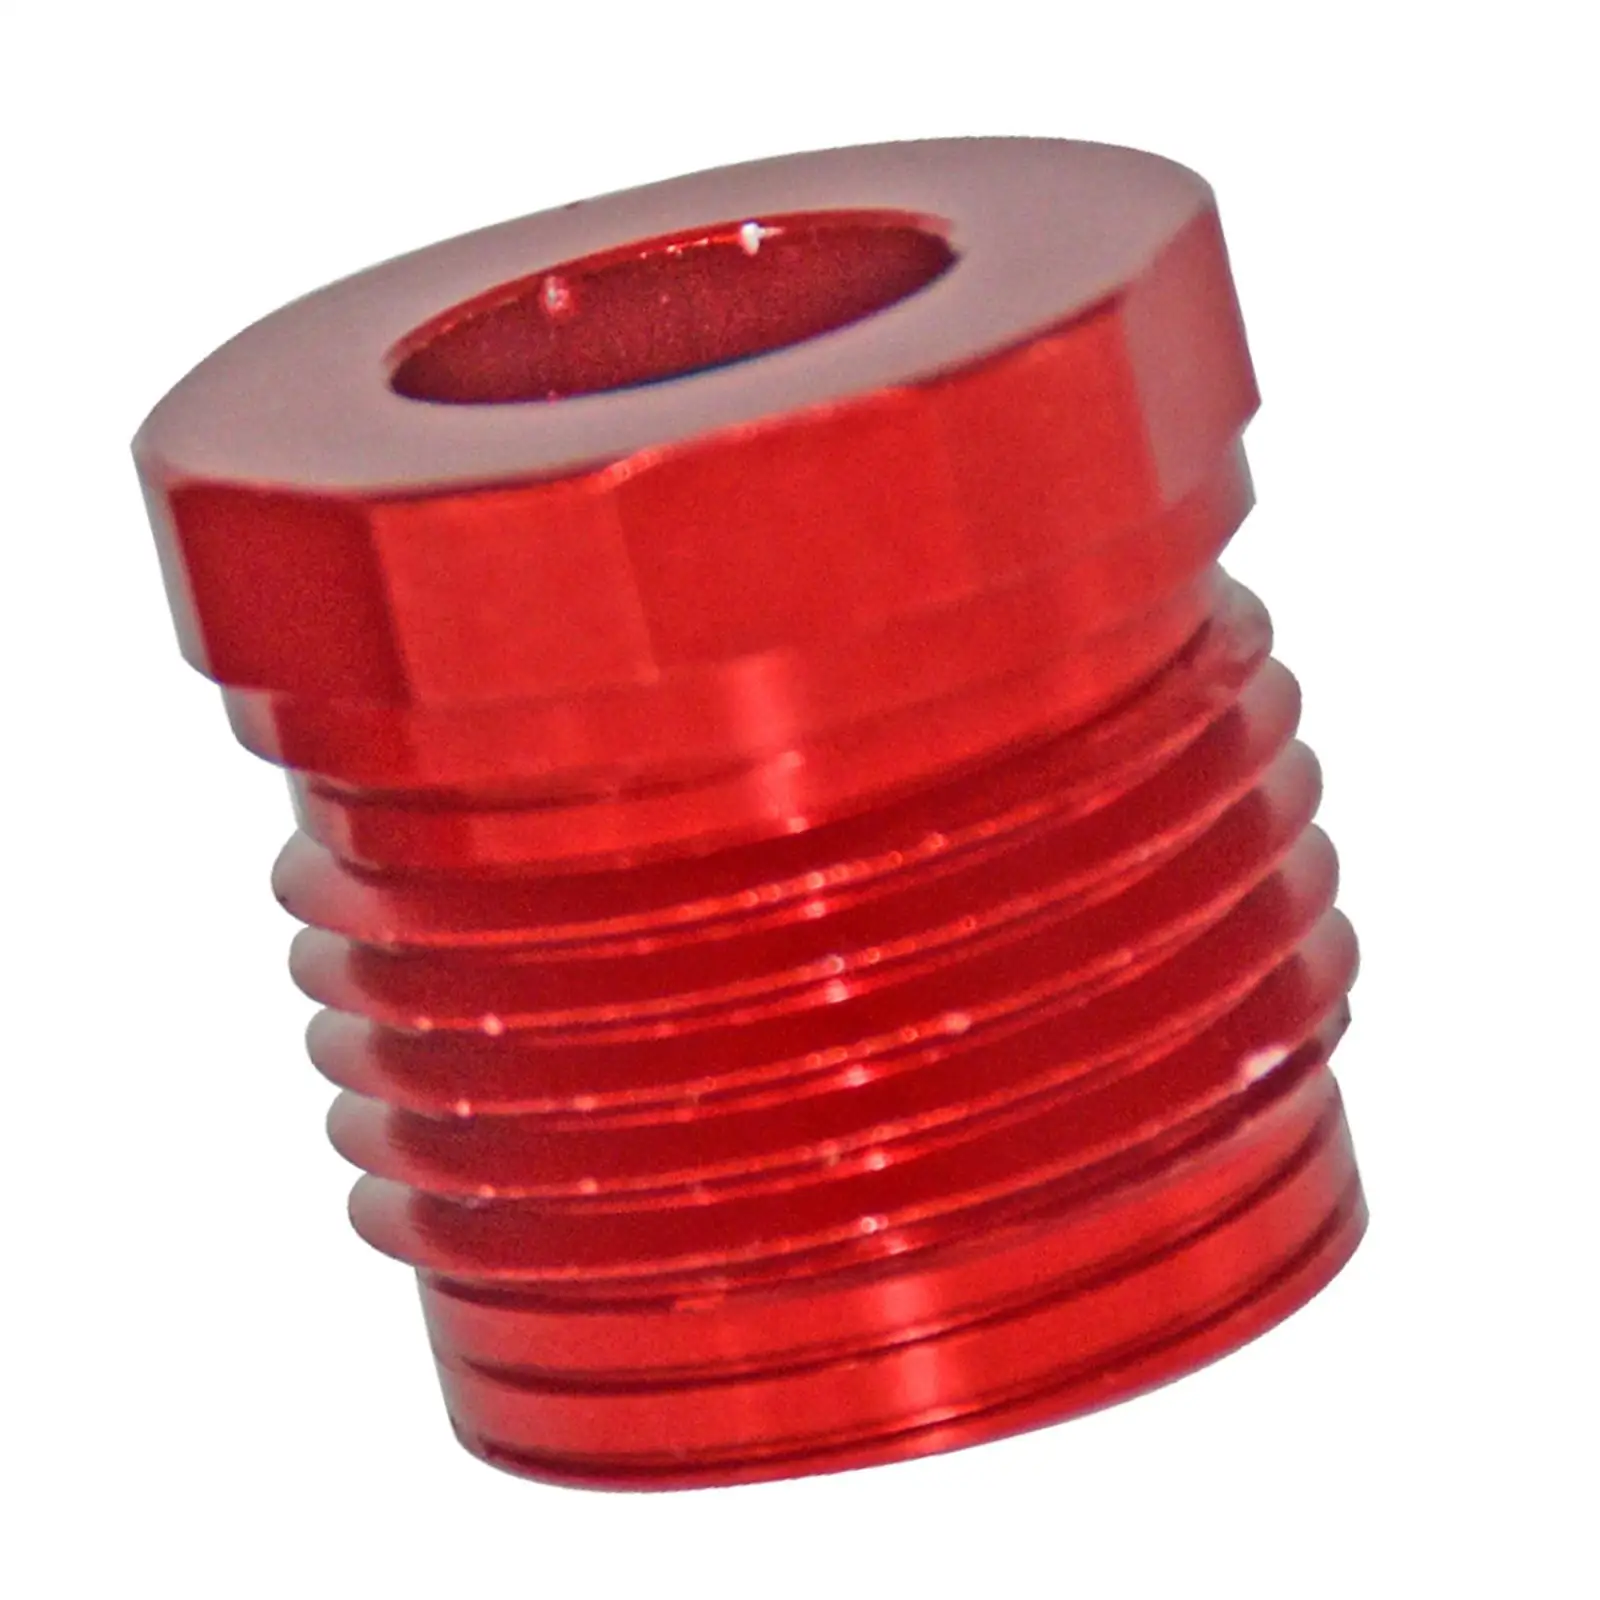 Steering and Reverse Cable Lock Nut Professional Replaces Durable Red Cable Lock Nut for Sea-Doo GTX XP140 GTI Accessories